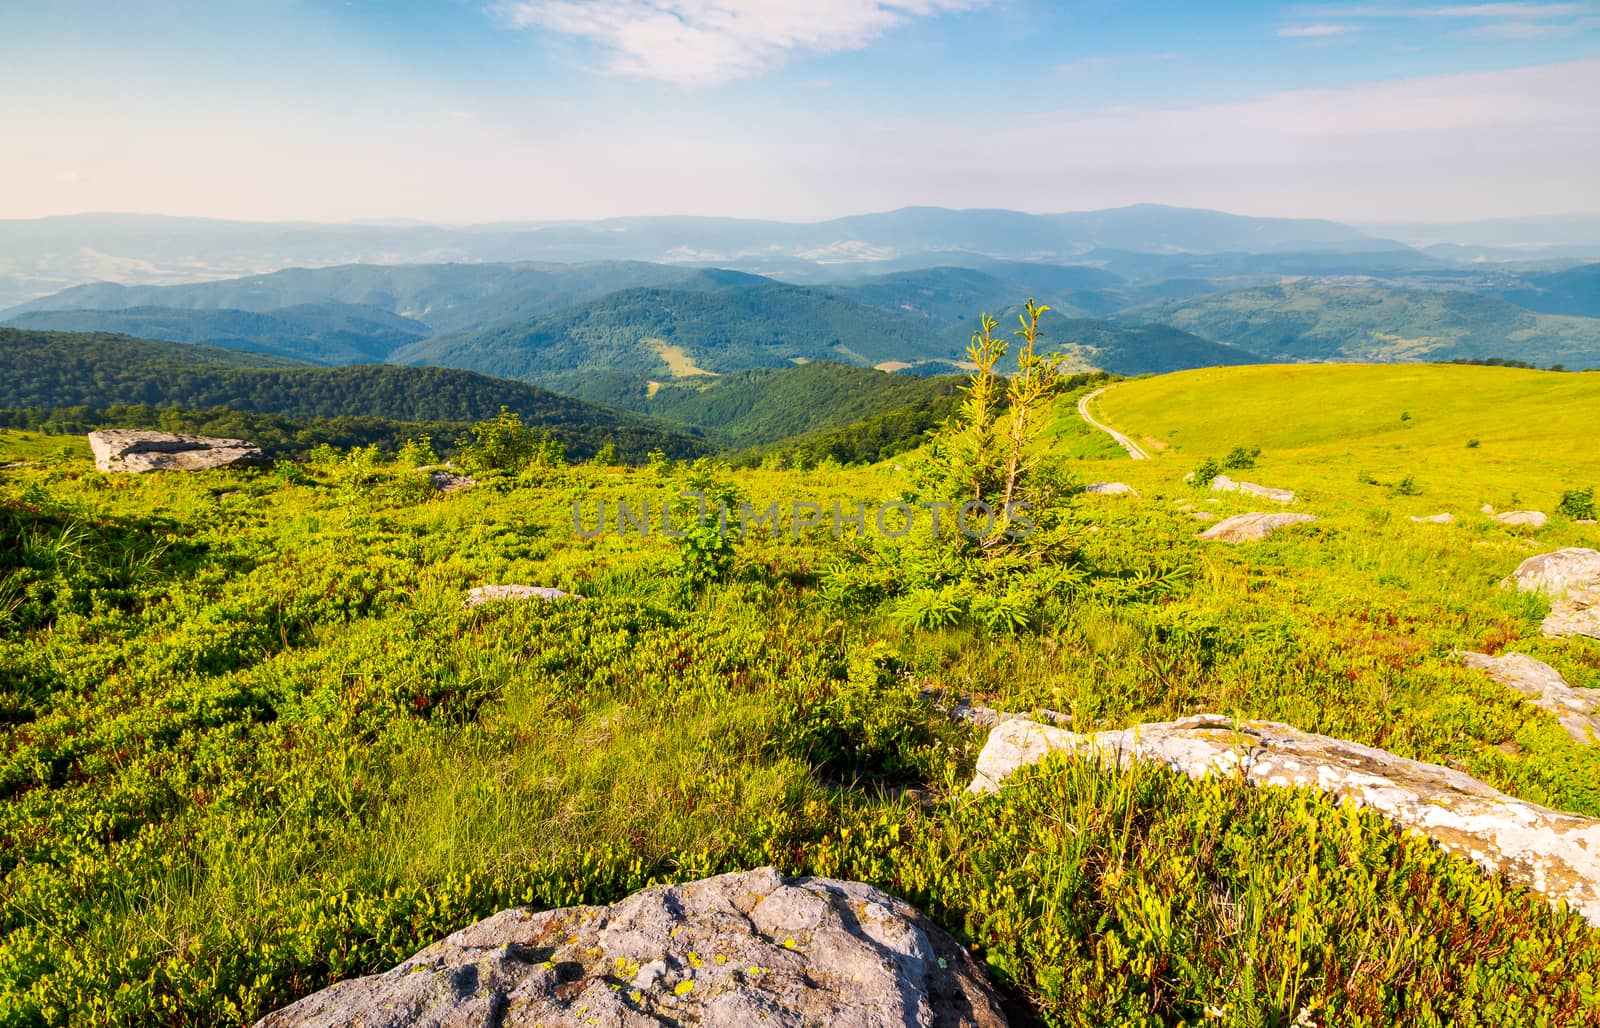 landscape of Carpathian high mountain ridge. lonely spruce tree among huge rocks on grassy hillside. gorgeous vewpoint with hills and peaks in the distance. spectacular scenery with blue sky and clouds in summer time